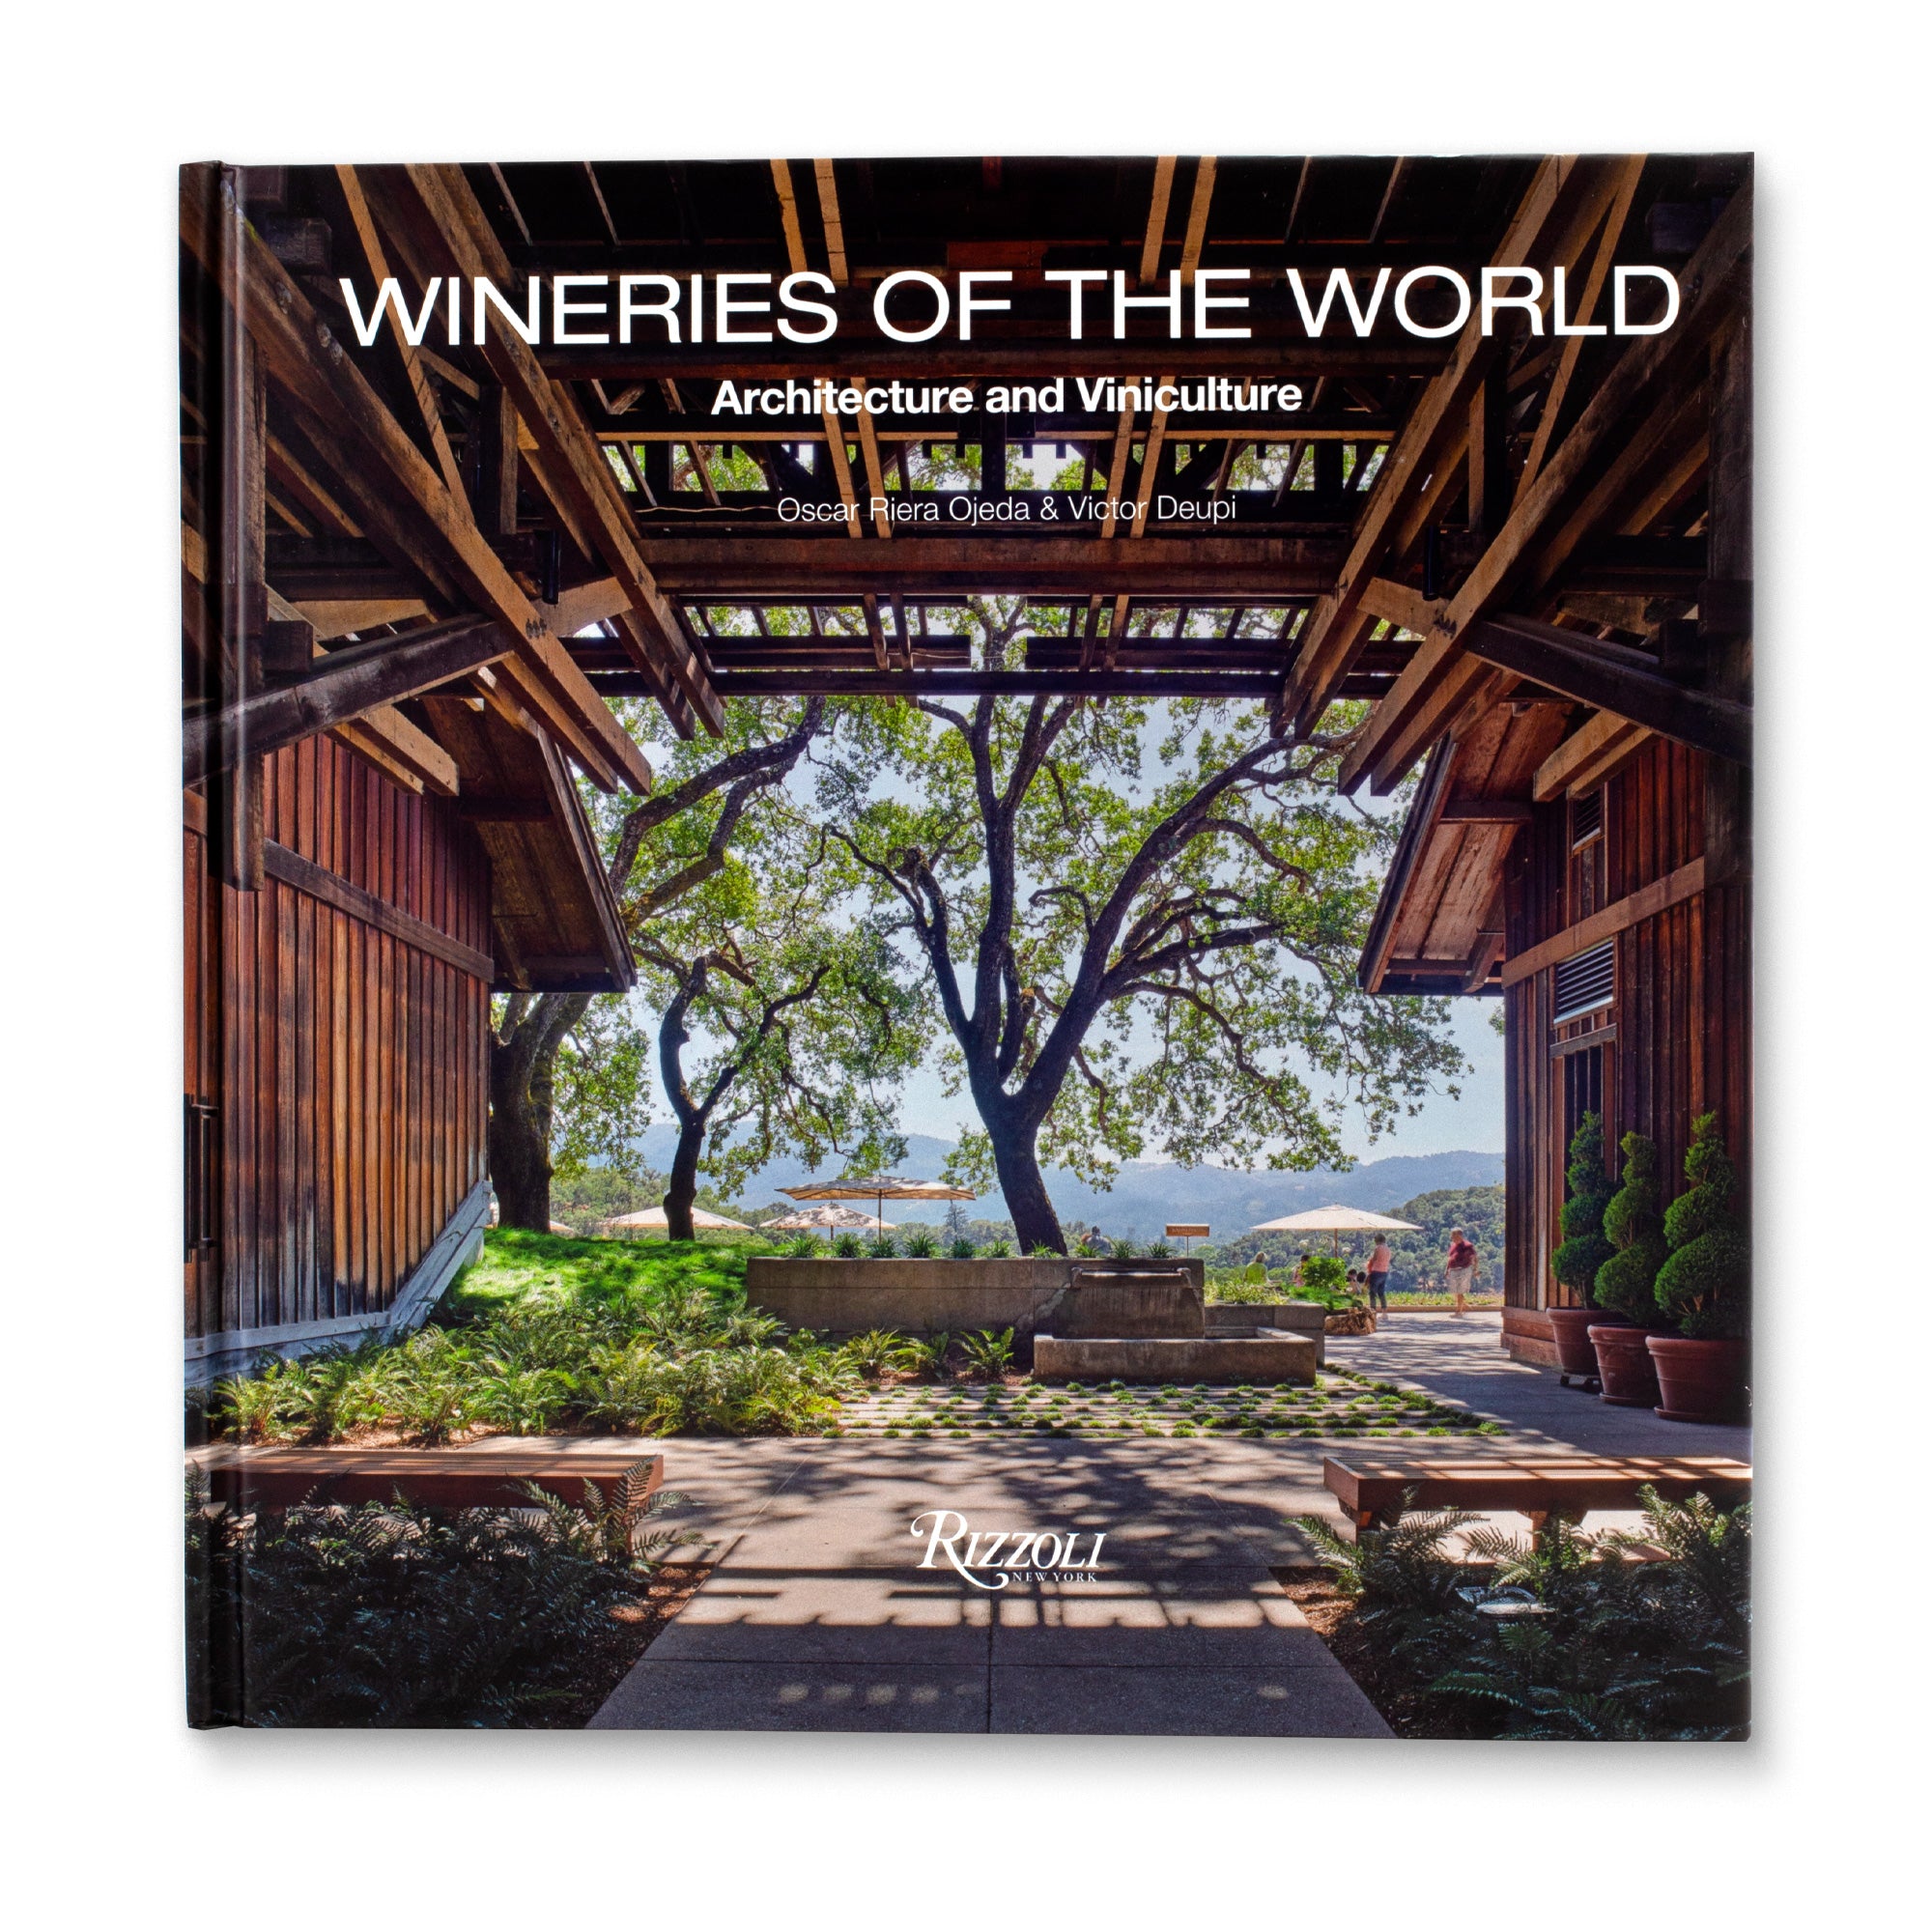 Wineries of the World - Architecture and Viniculture